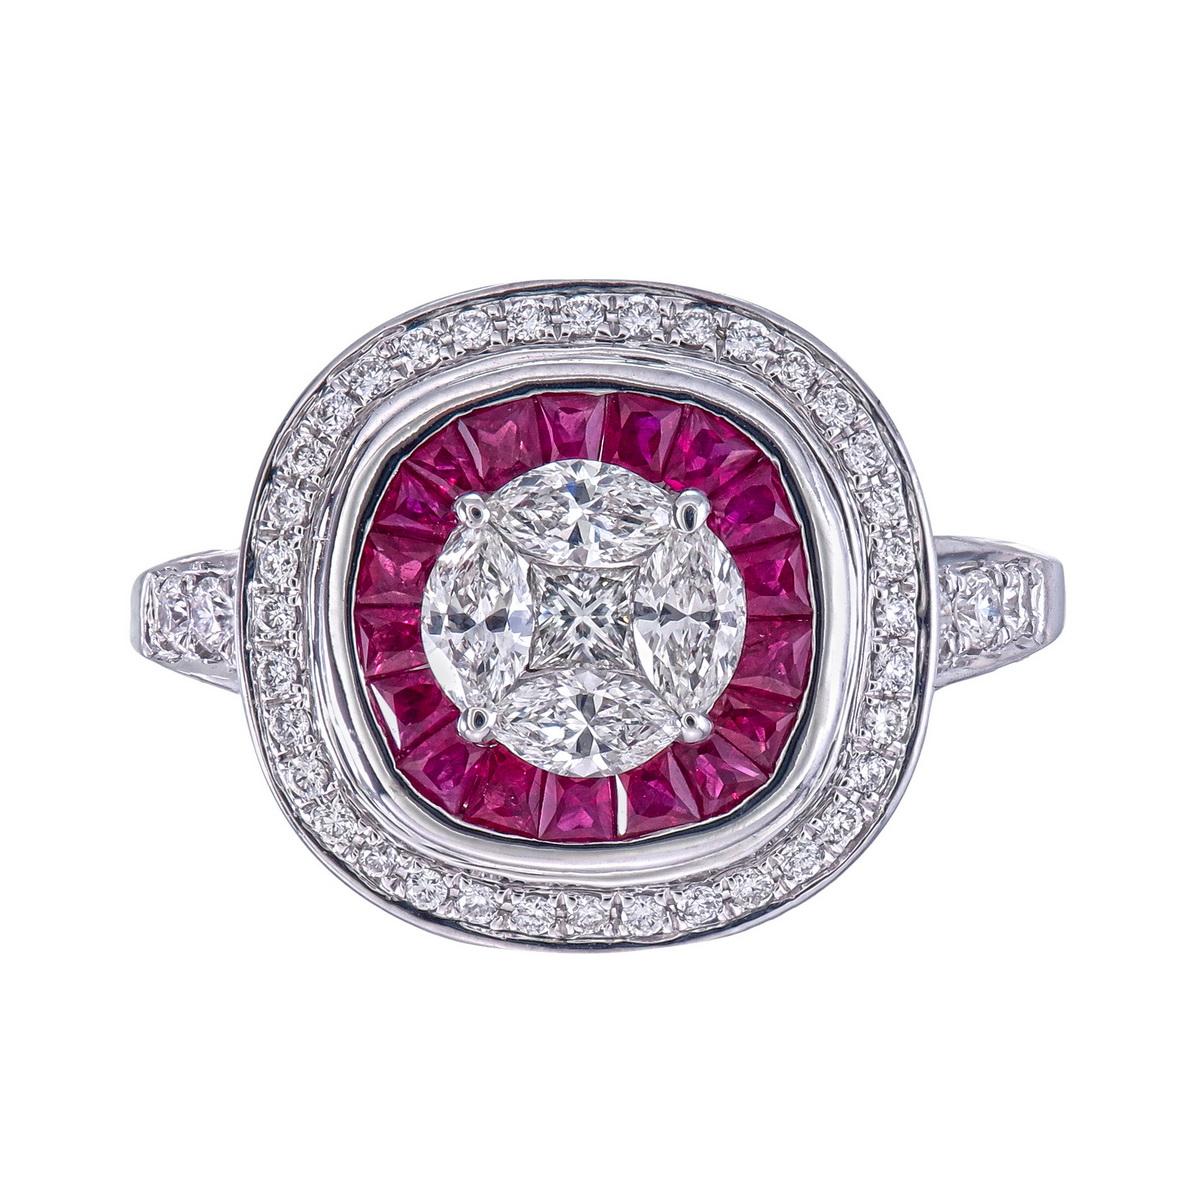 Vintage style with Marquise & princess illusion set diamonds to give a 2 carat diamond look.
First halo of Natural ruby well assorted making sure of the same color & quality.
Another halo of round diamonds with a plain gold shank.
Daily wear /Office